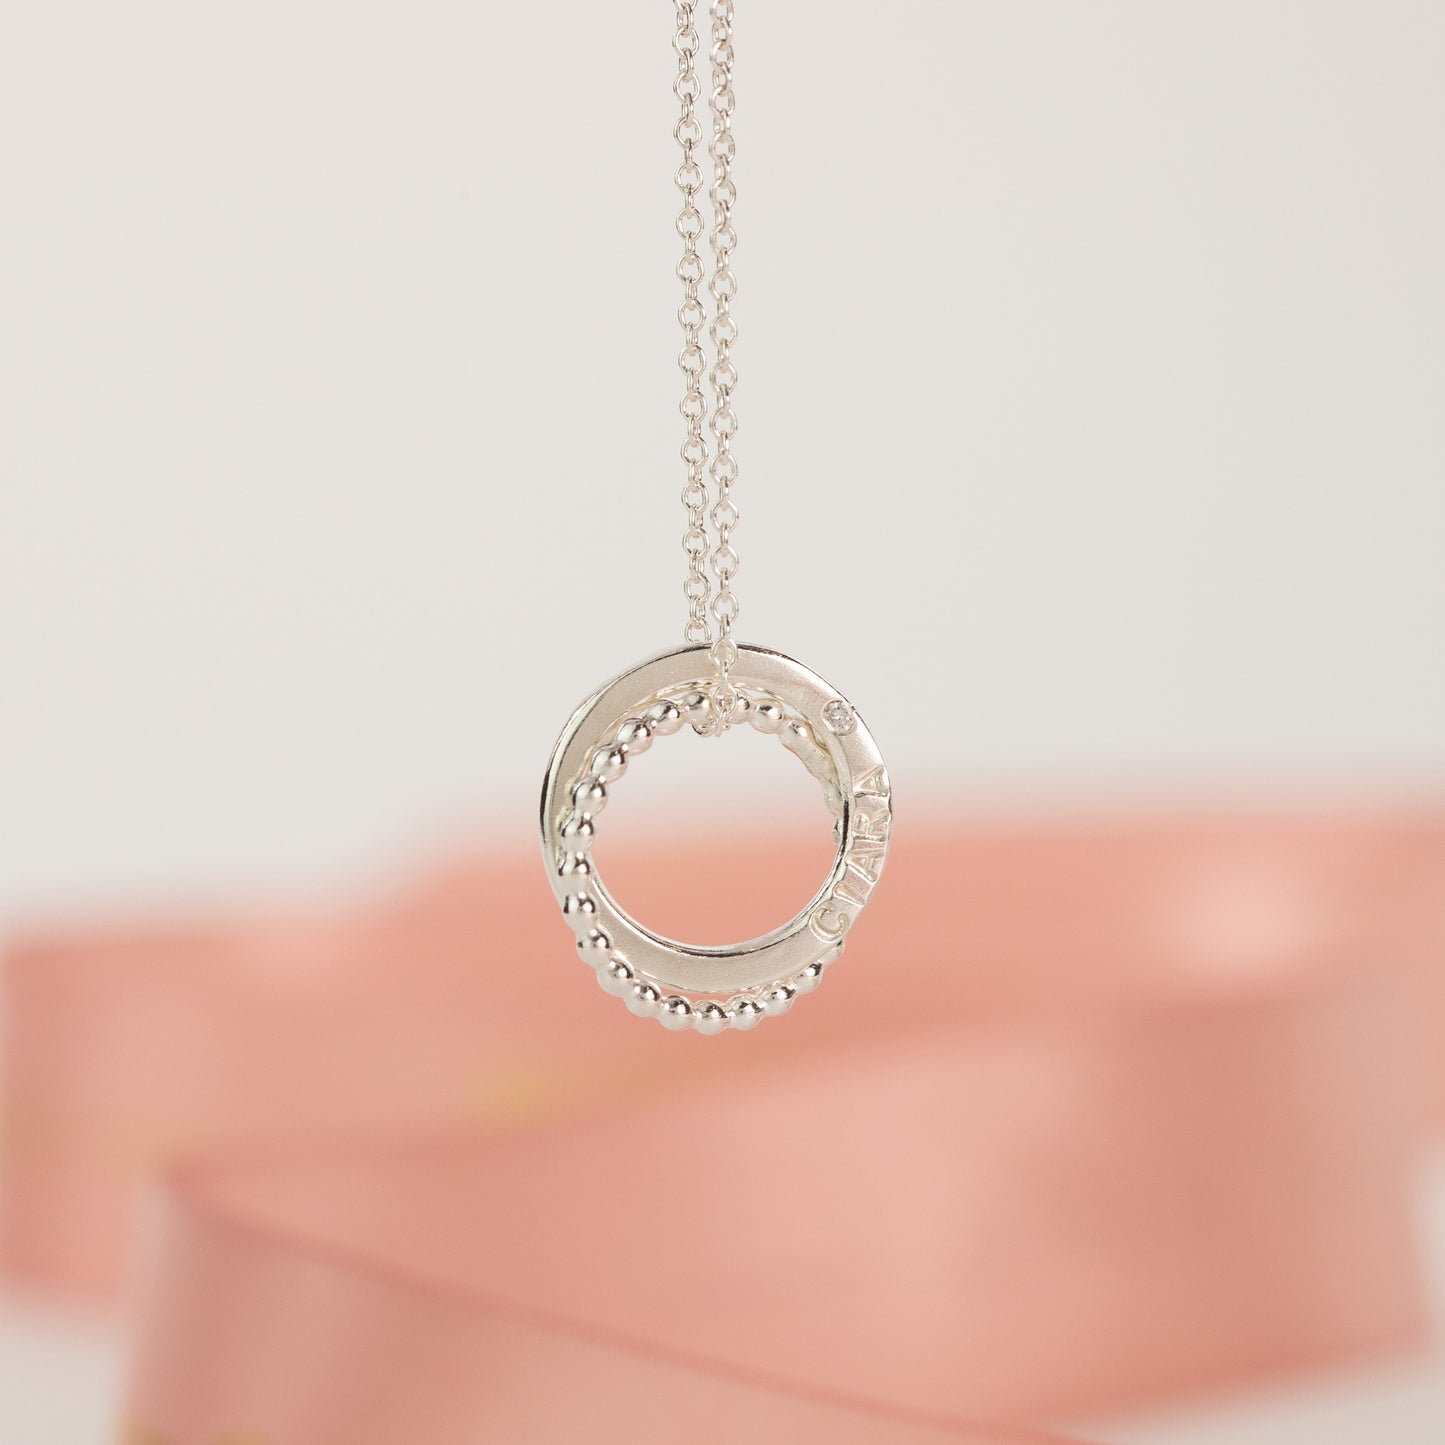 21st Birthday Gift - Personalised Double Link Necklace with Diamond